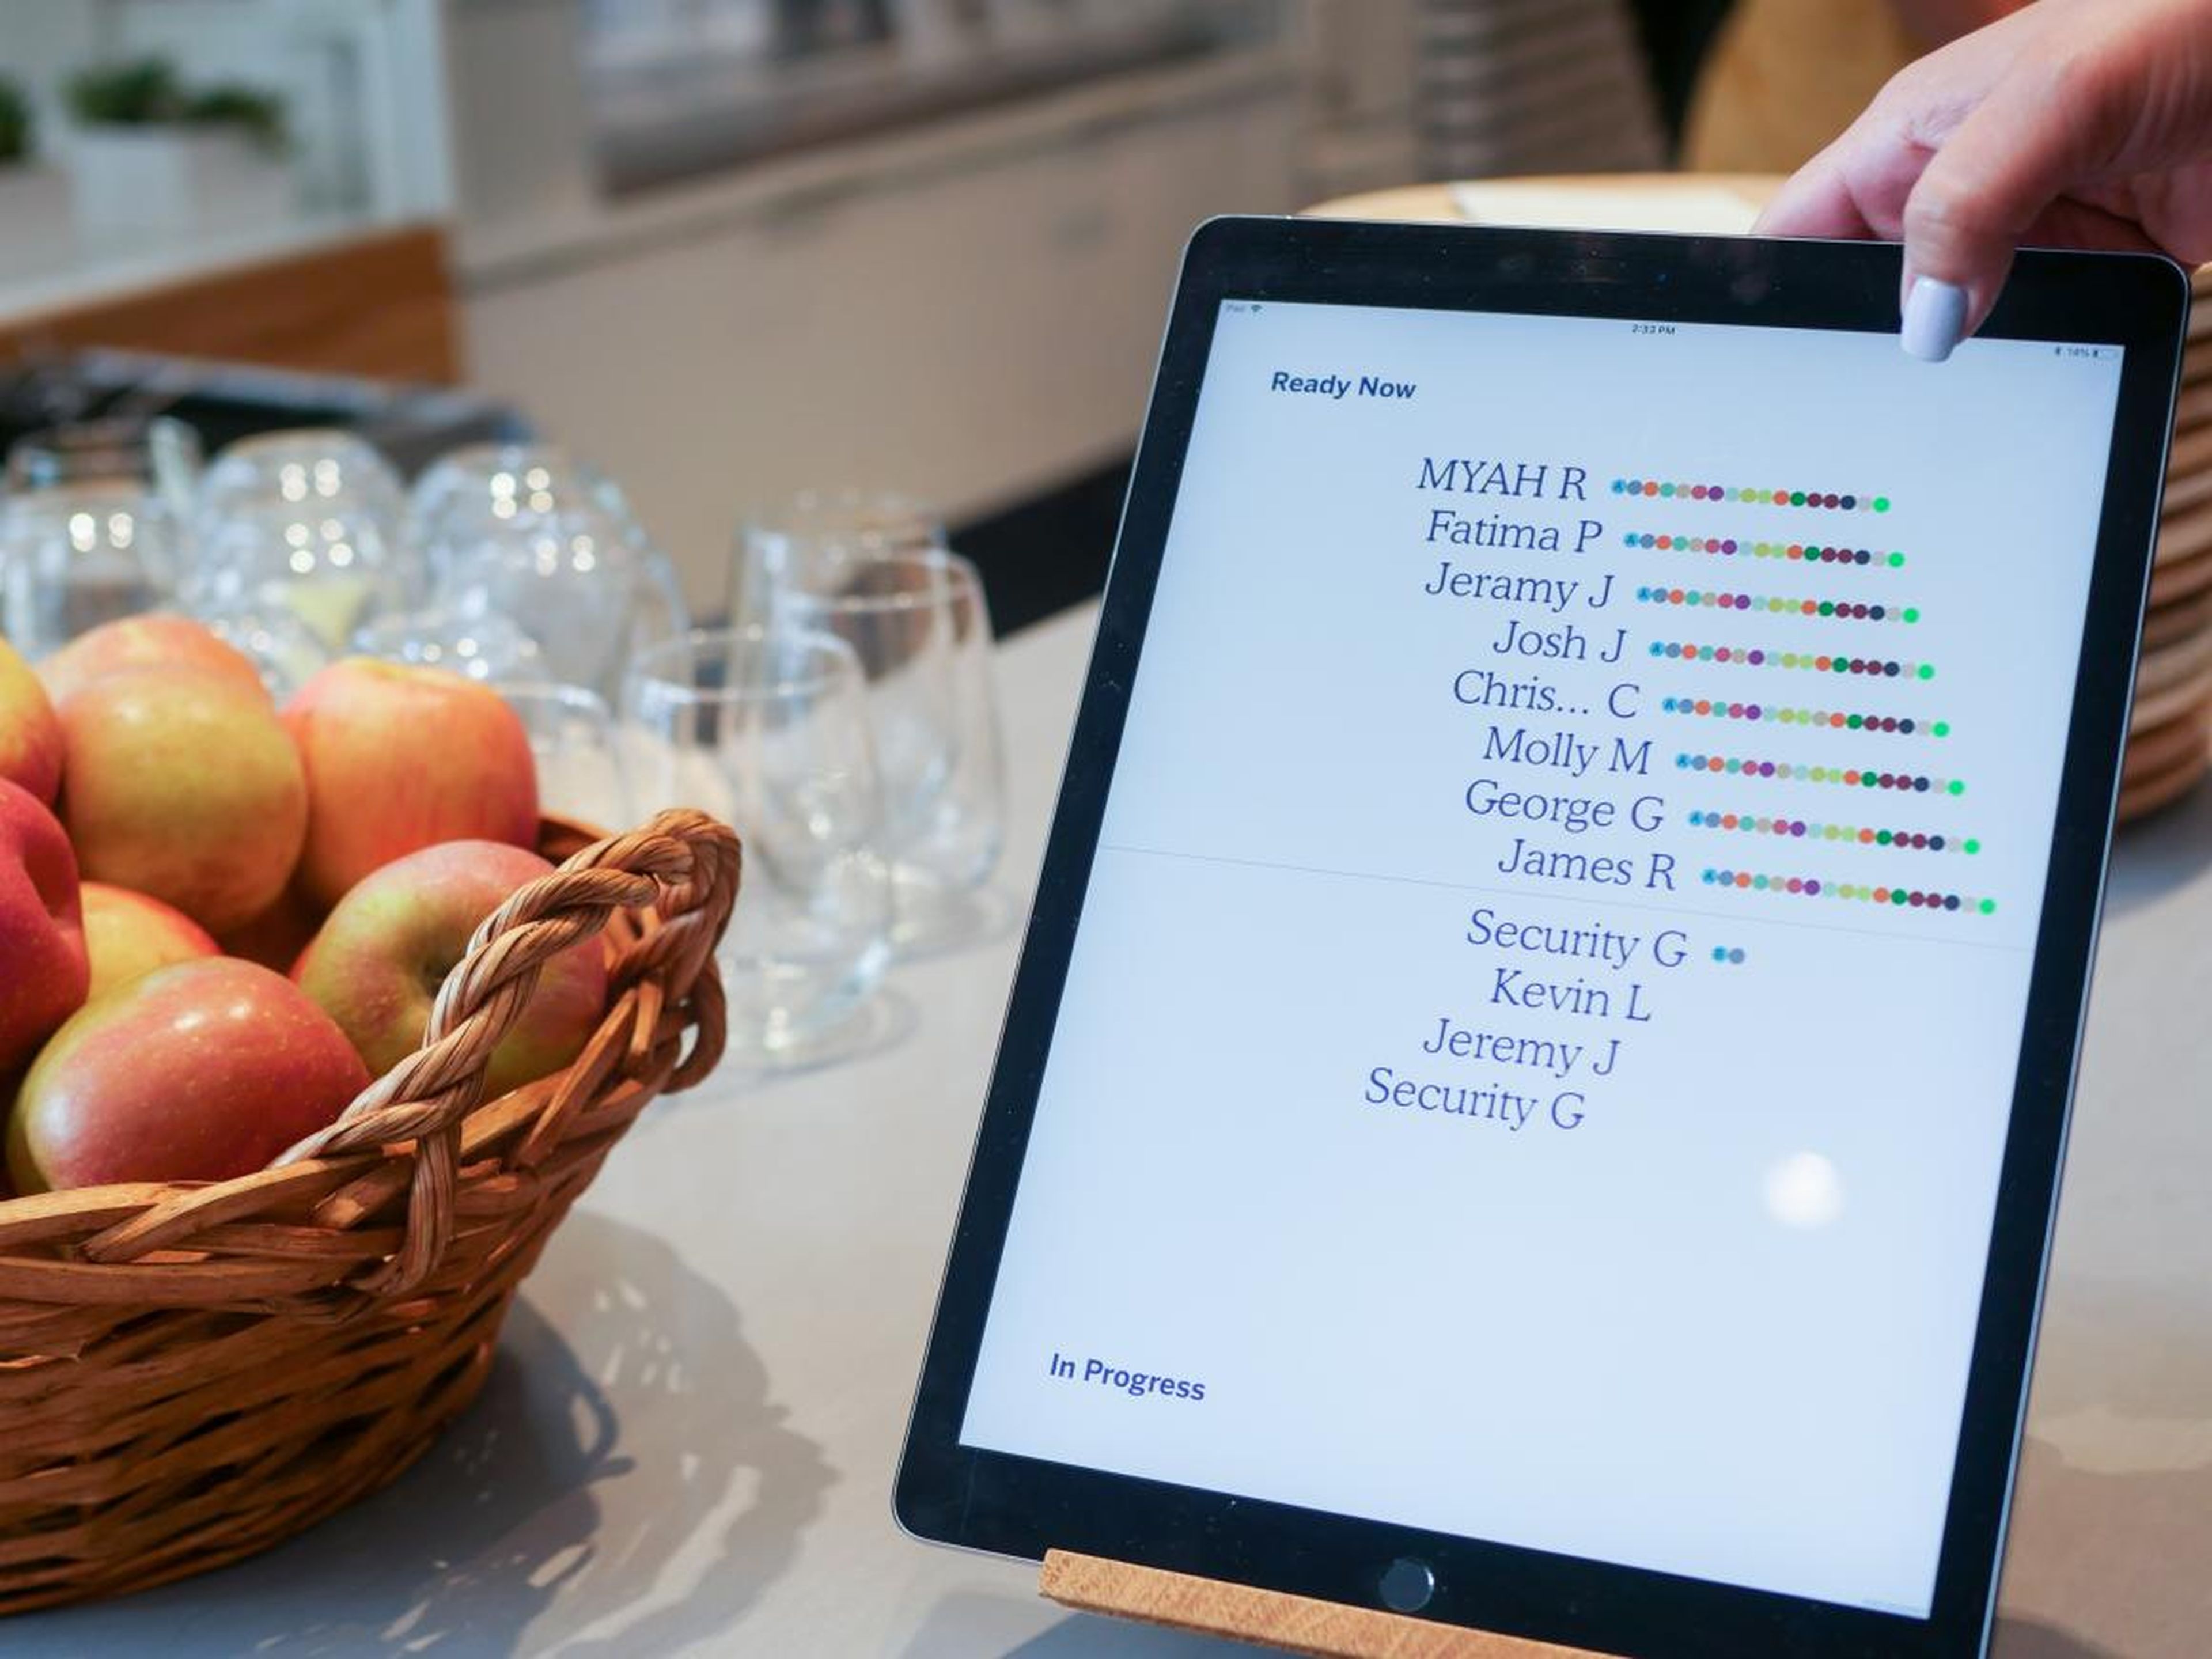 Over at Creator, "robot attendants," or human employees, take customers' orders on devices. The status of each customer's order could be tracked on a counter tablet.